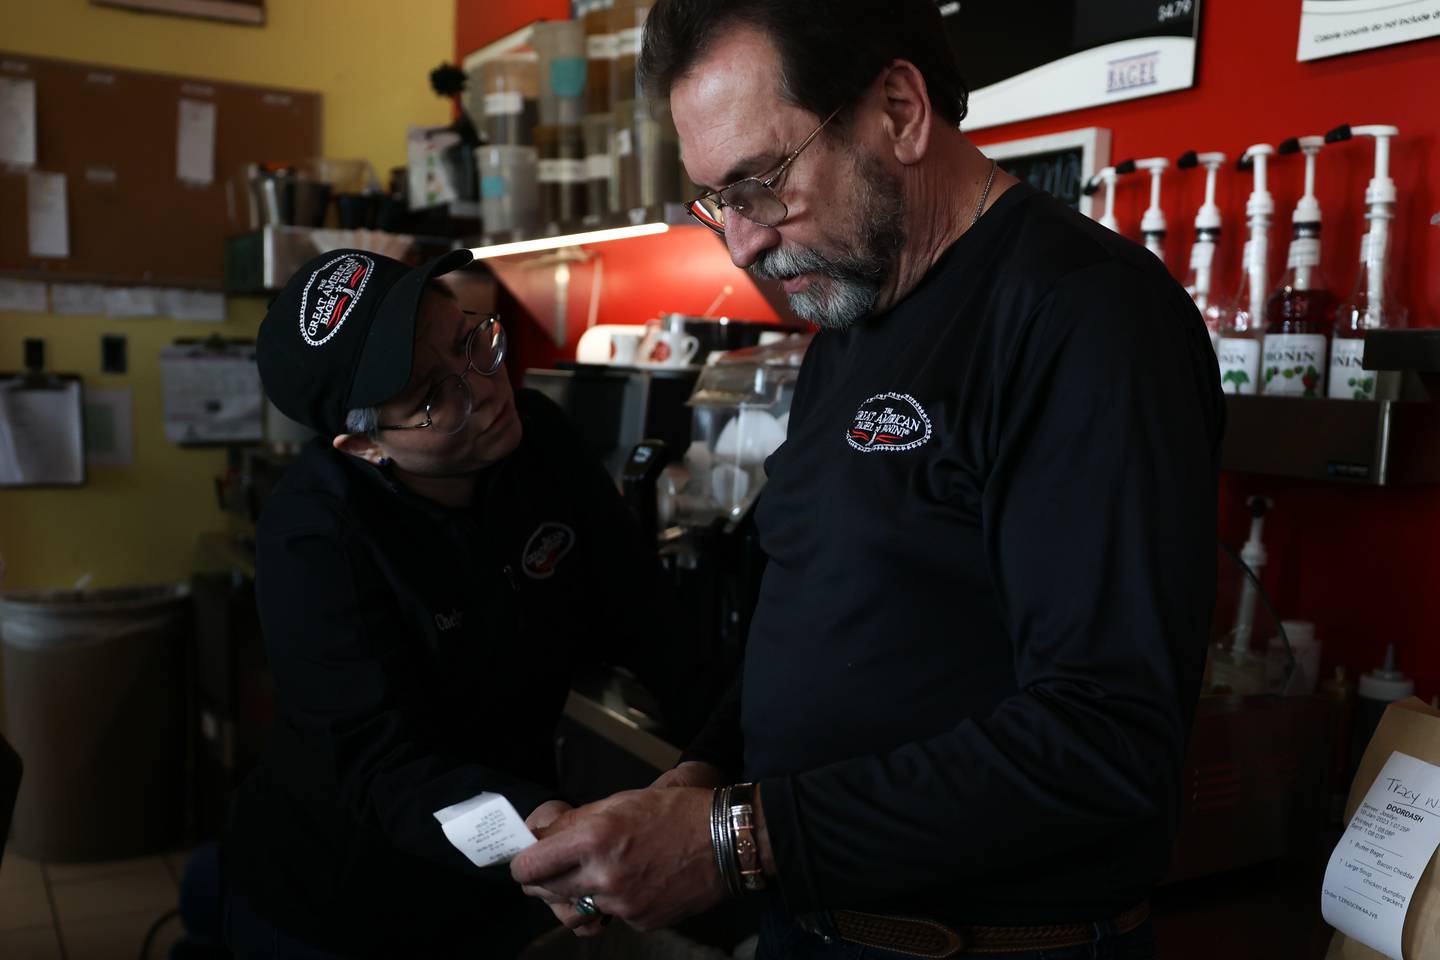 Tom Grotovsky, owner of Great American Bagel, looks over an order with Chely Castillo at his Joliet location on Essington Road.